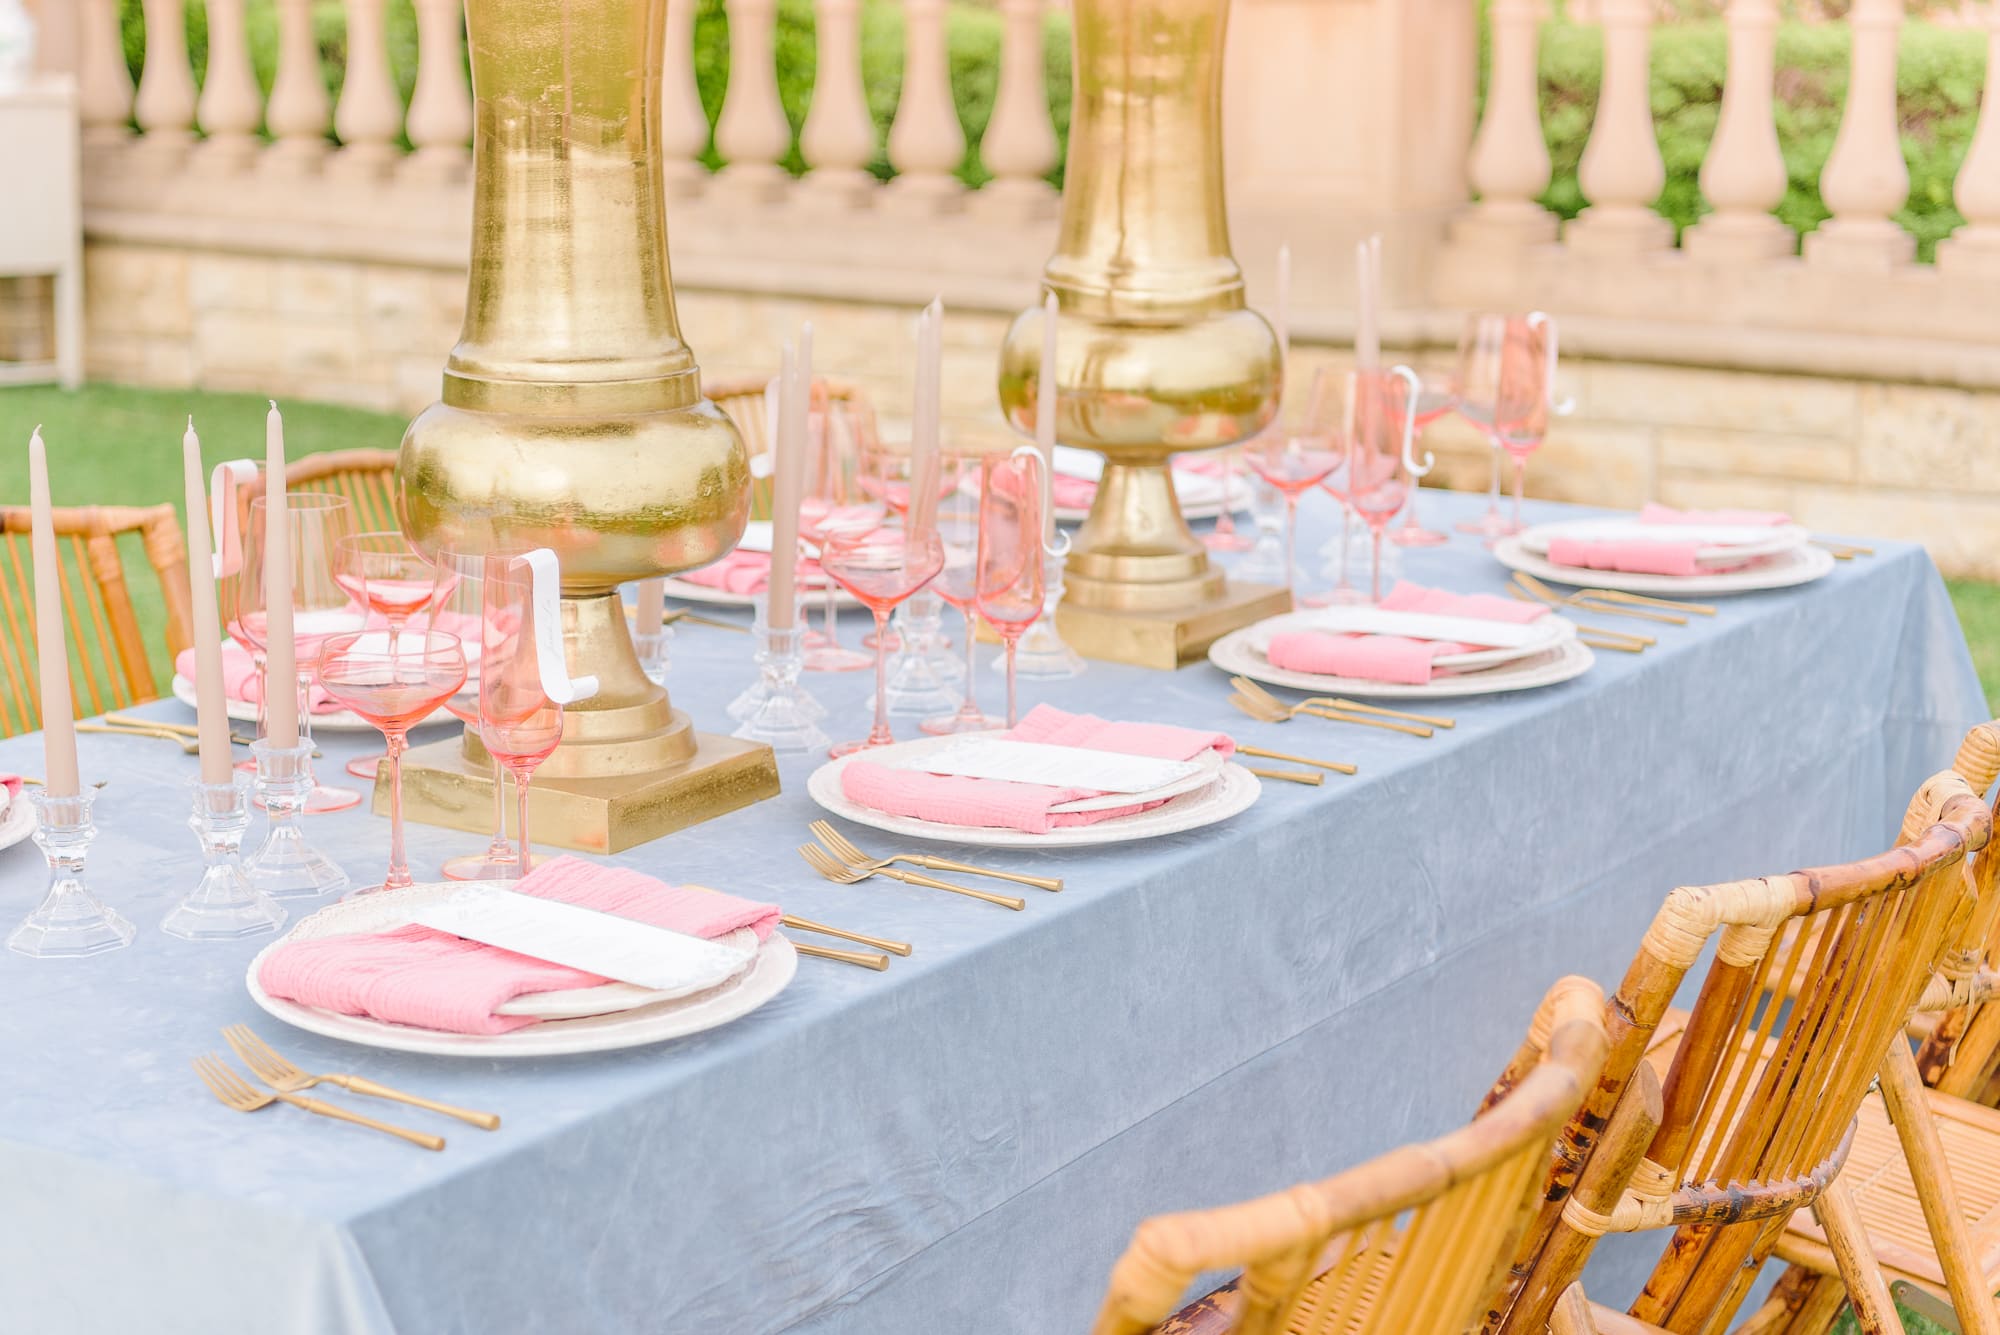 Weddings in summer colors might use pink, like in this pink table setting here.